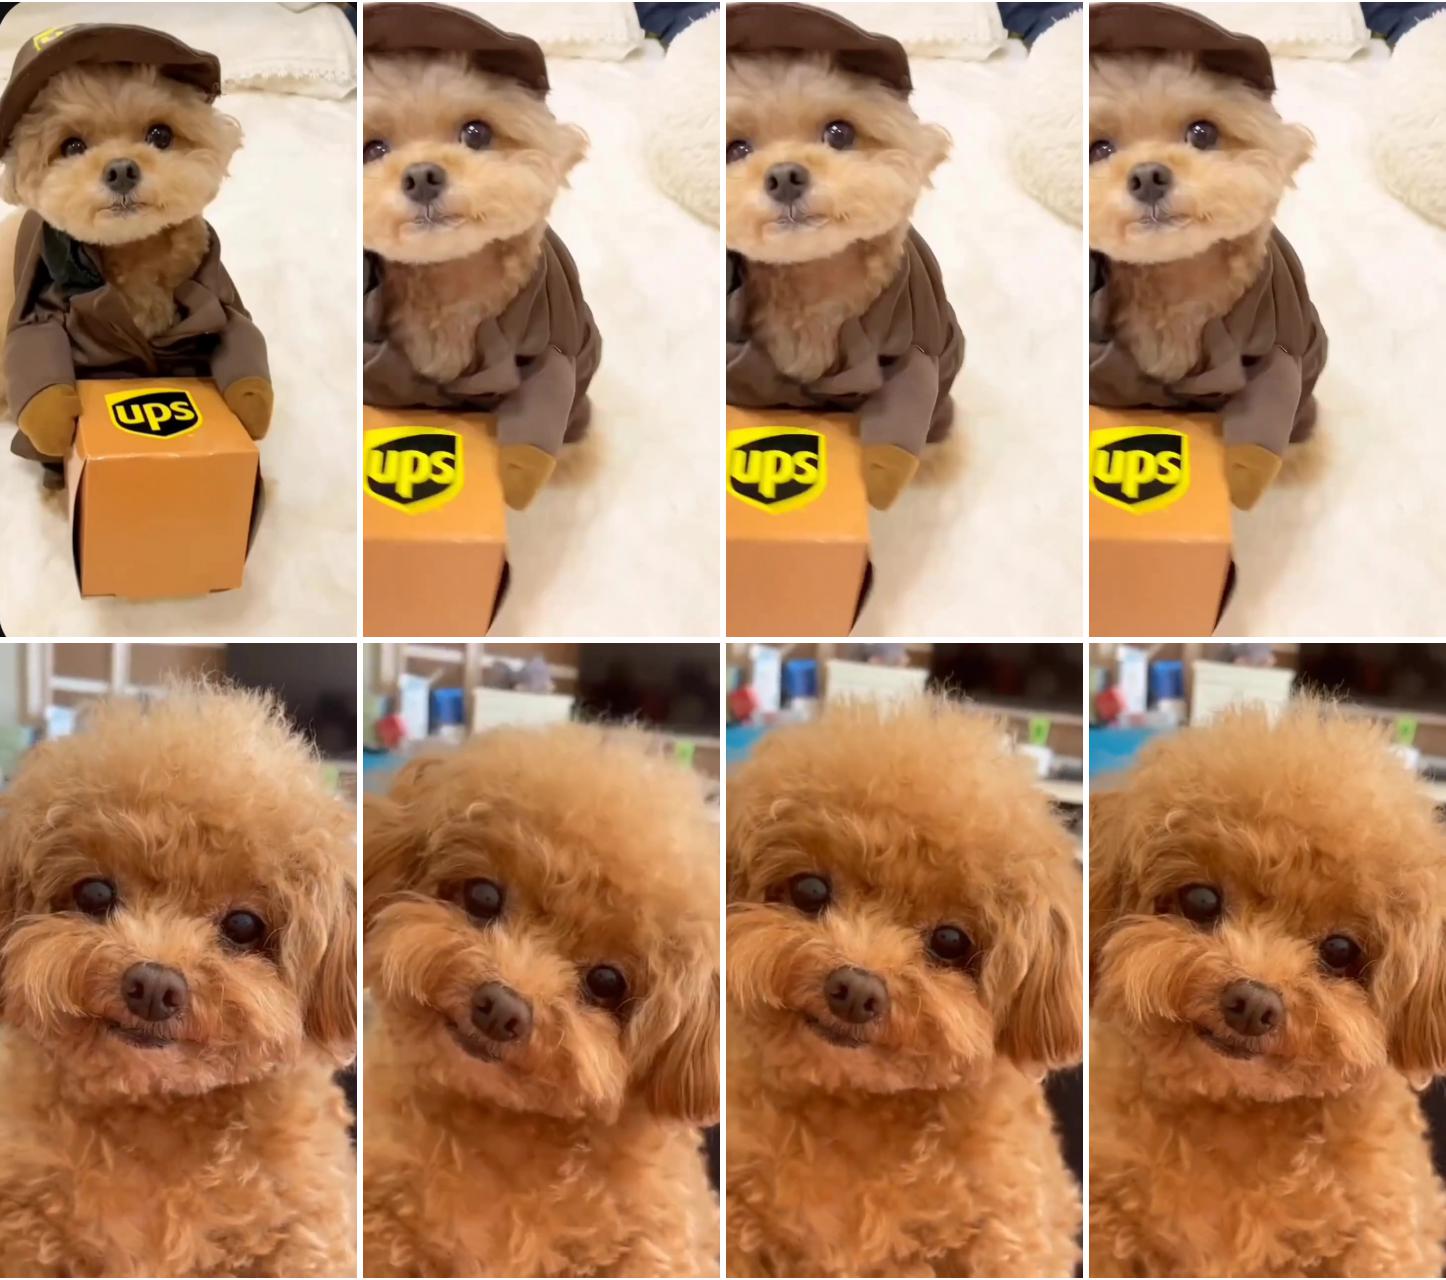 Adorable toy poodle puppy in funny dog costume ; smiley dog